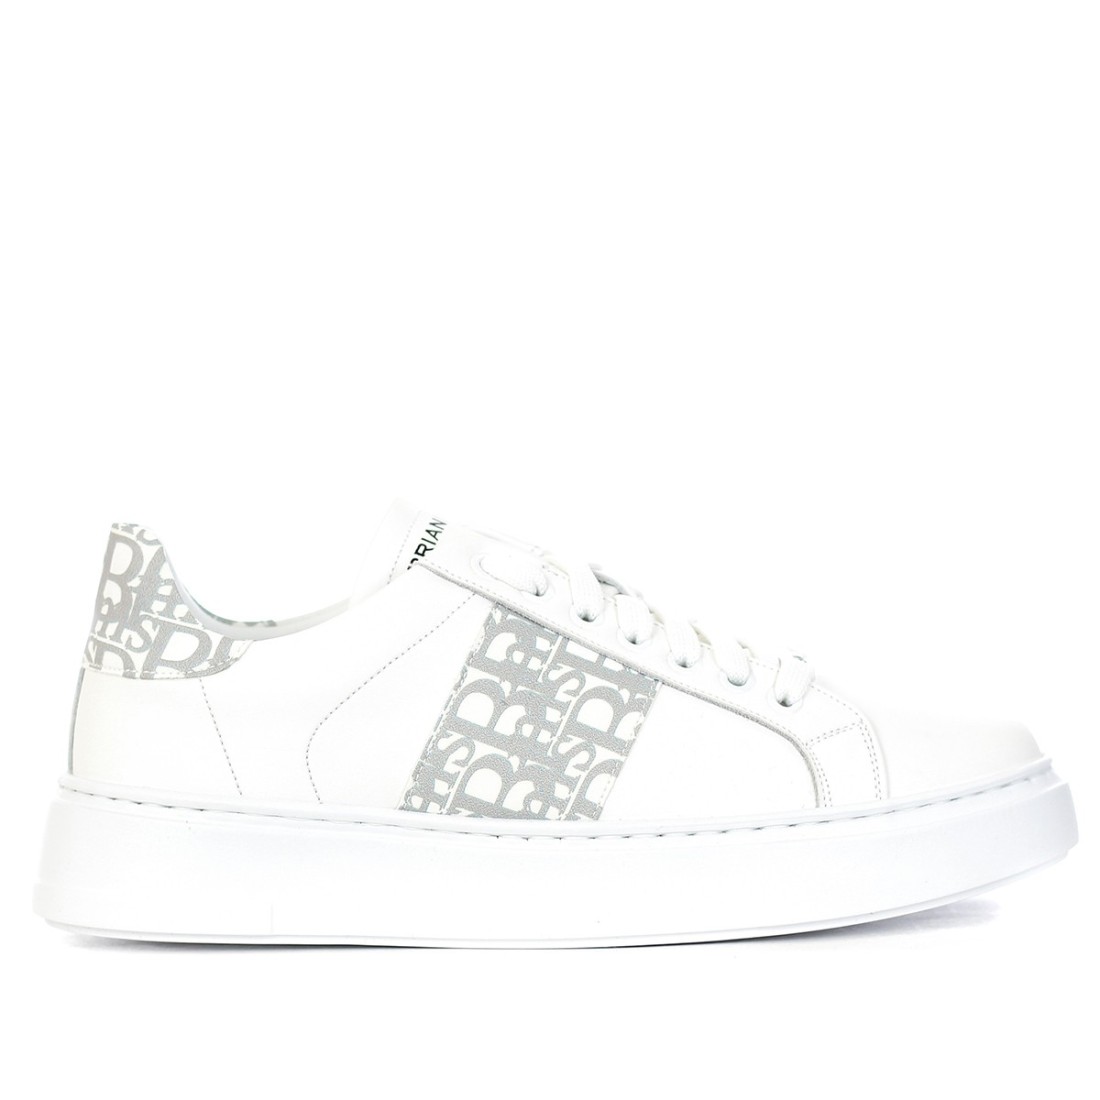 Image of BRIAN MILLS - Sneakers con logo - Colore: Bianco,T